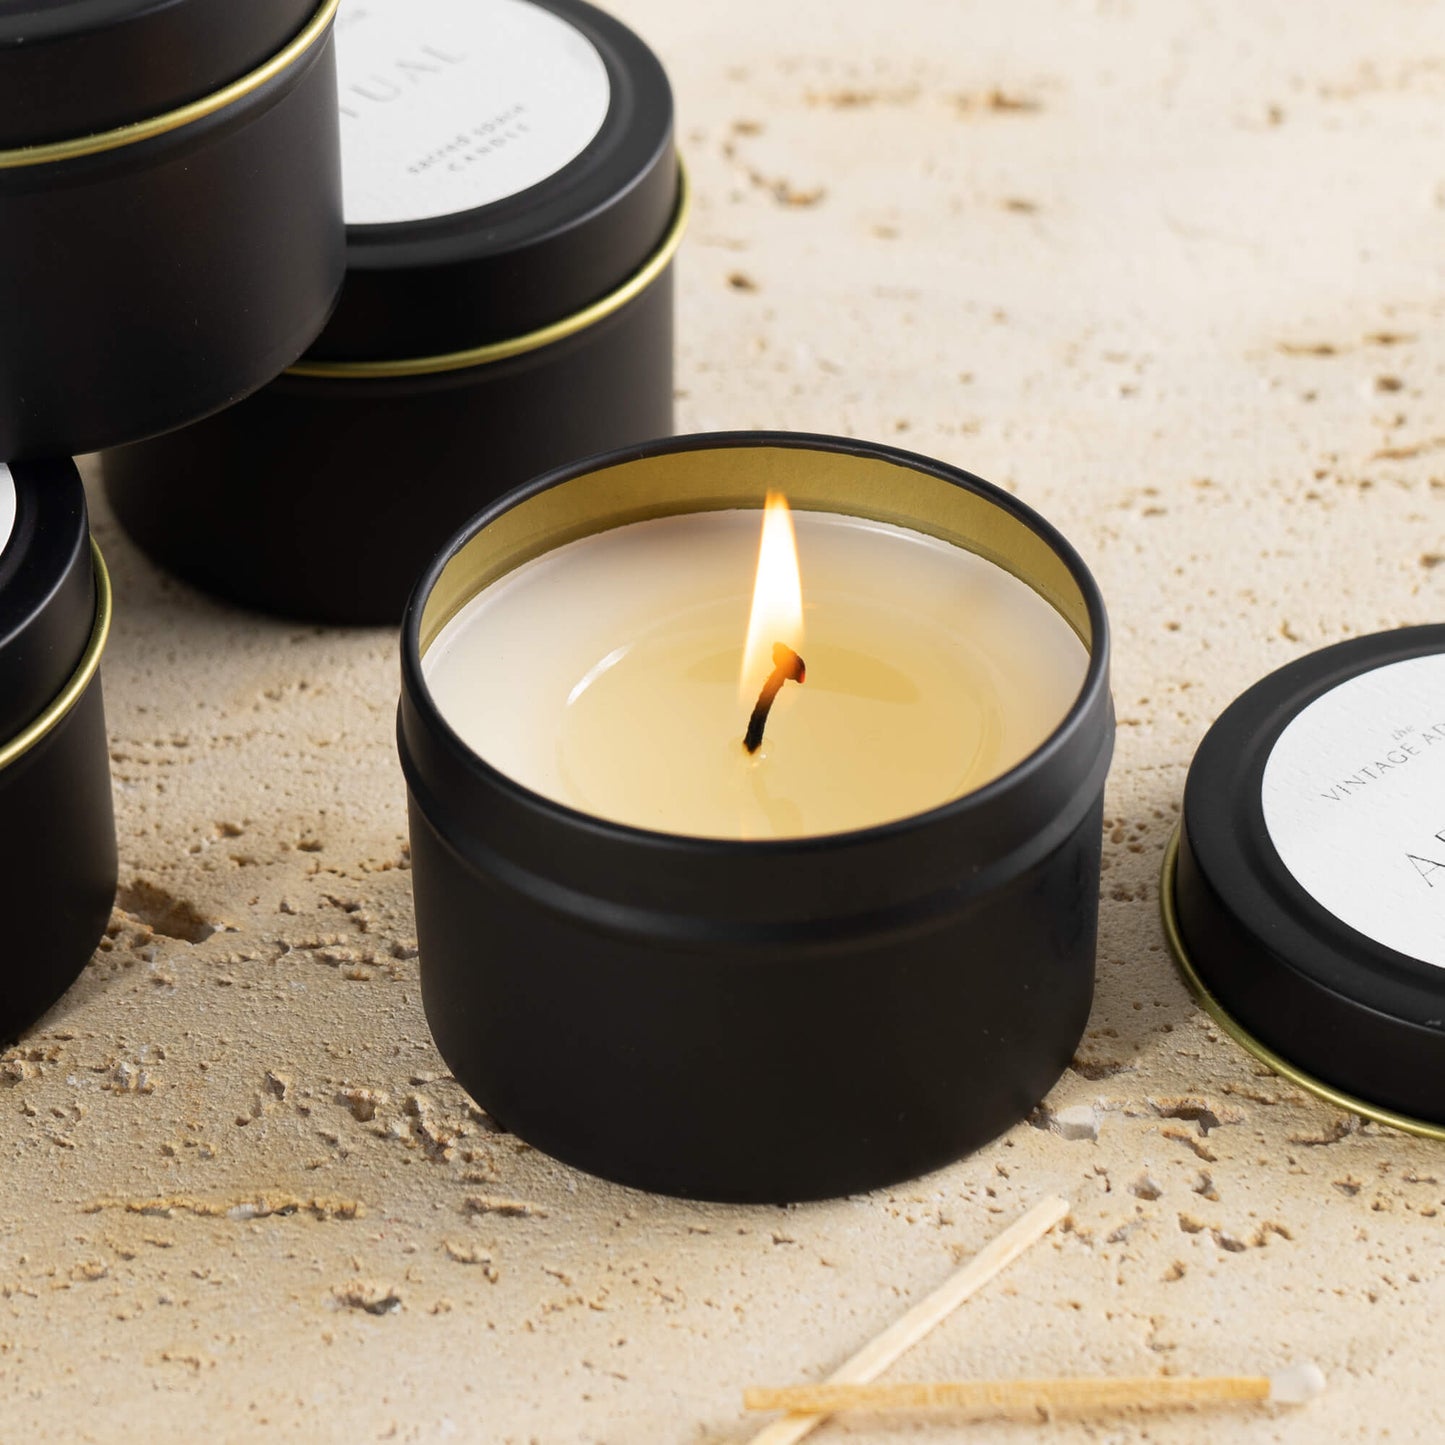 Lit candle -  4 Travel-sized Candles in Luxury Set 